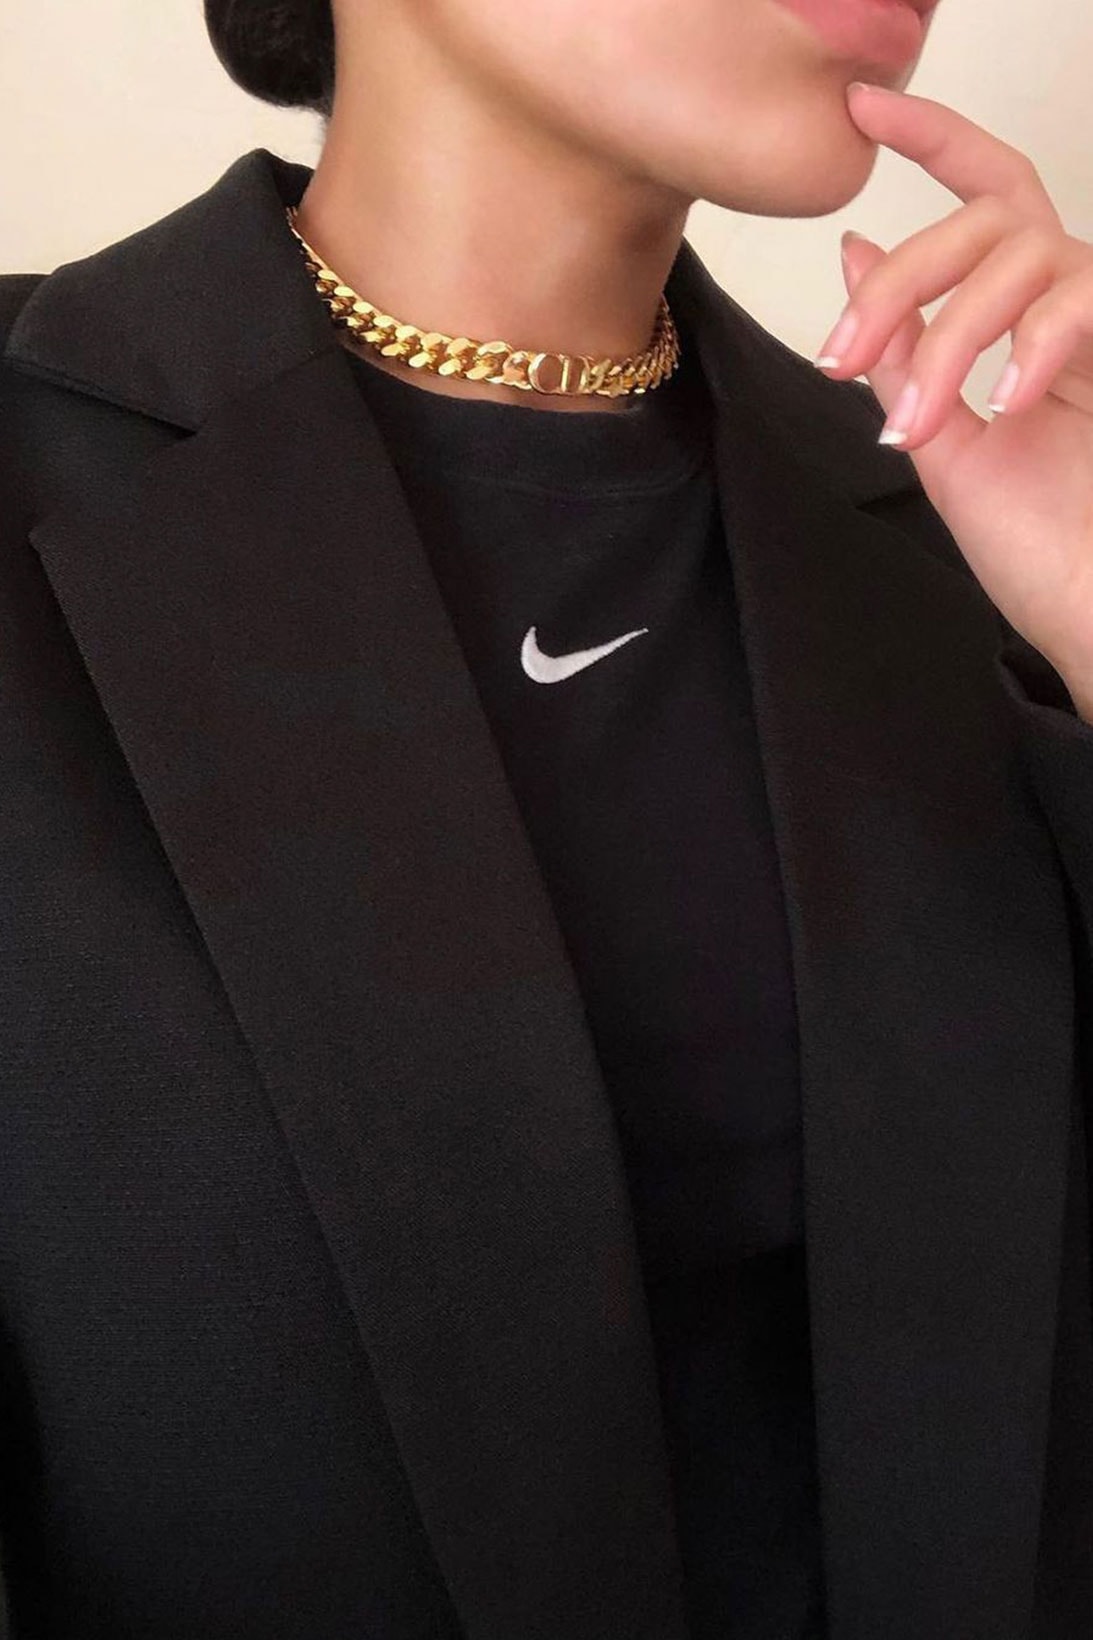 how to wear black editor's styling guide outfit ootd nike swoosh blazer jacket cd dior gold chain necklace